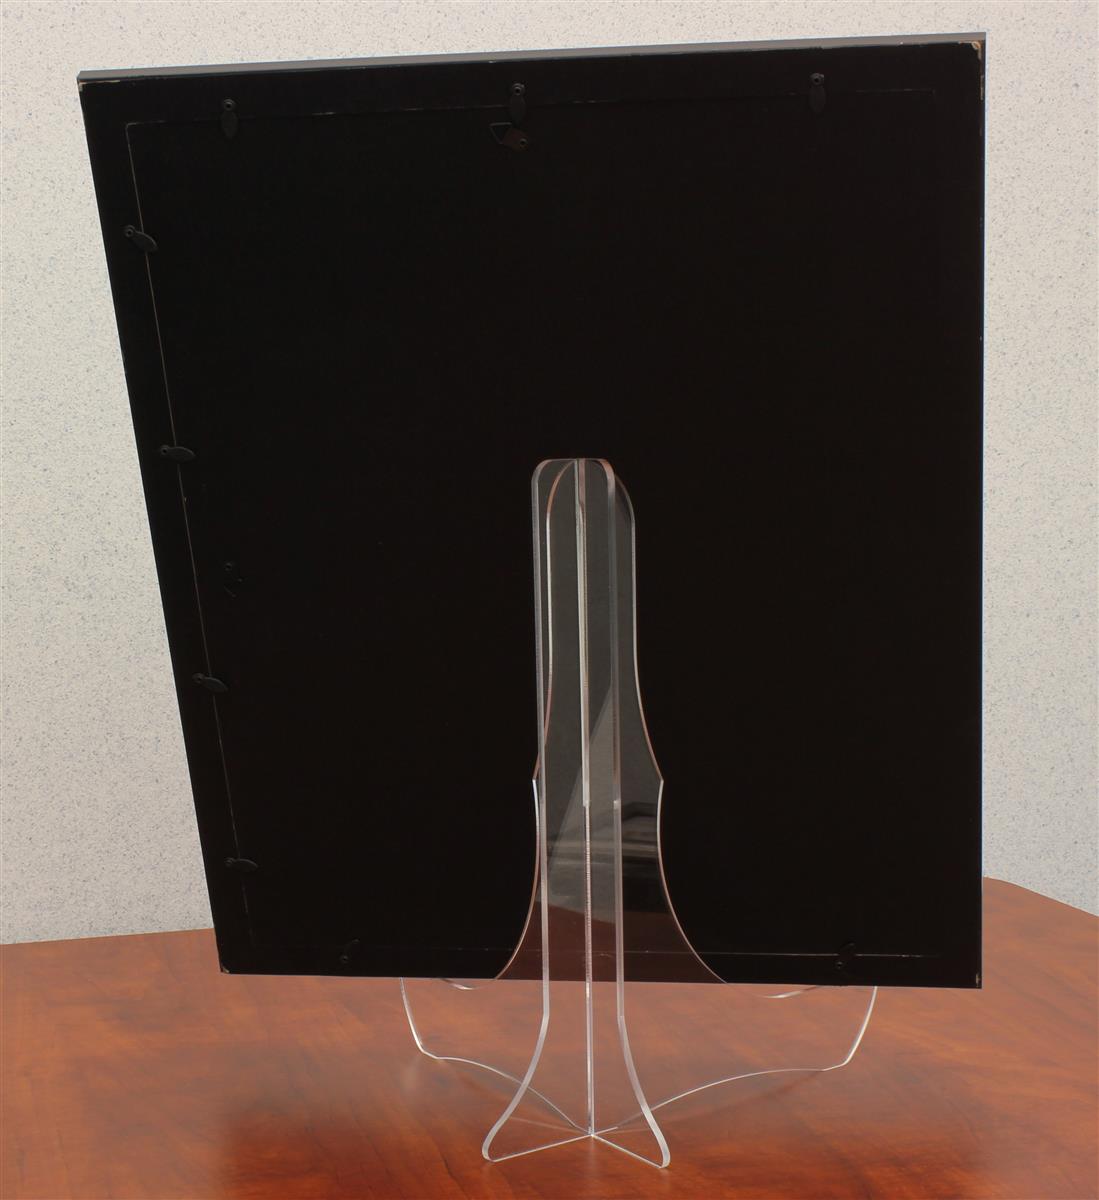 10cm-25cm Black & Clear : Plate Modern Display Stand /Easel Photo 4" to 10" 